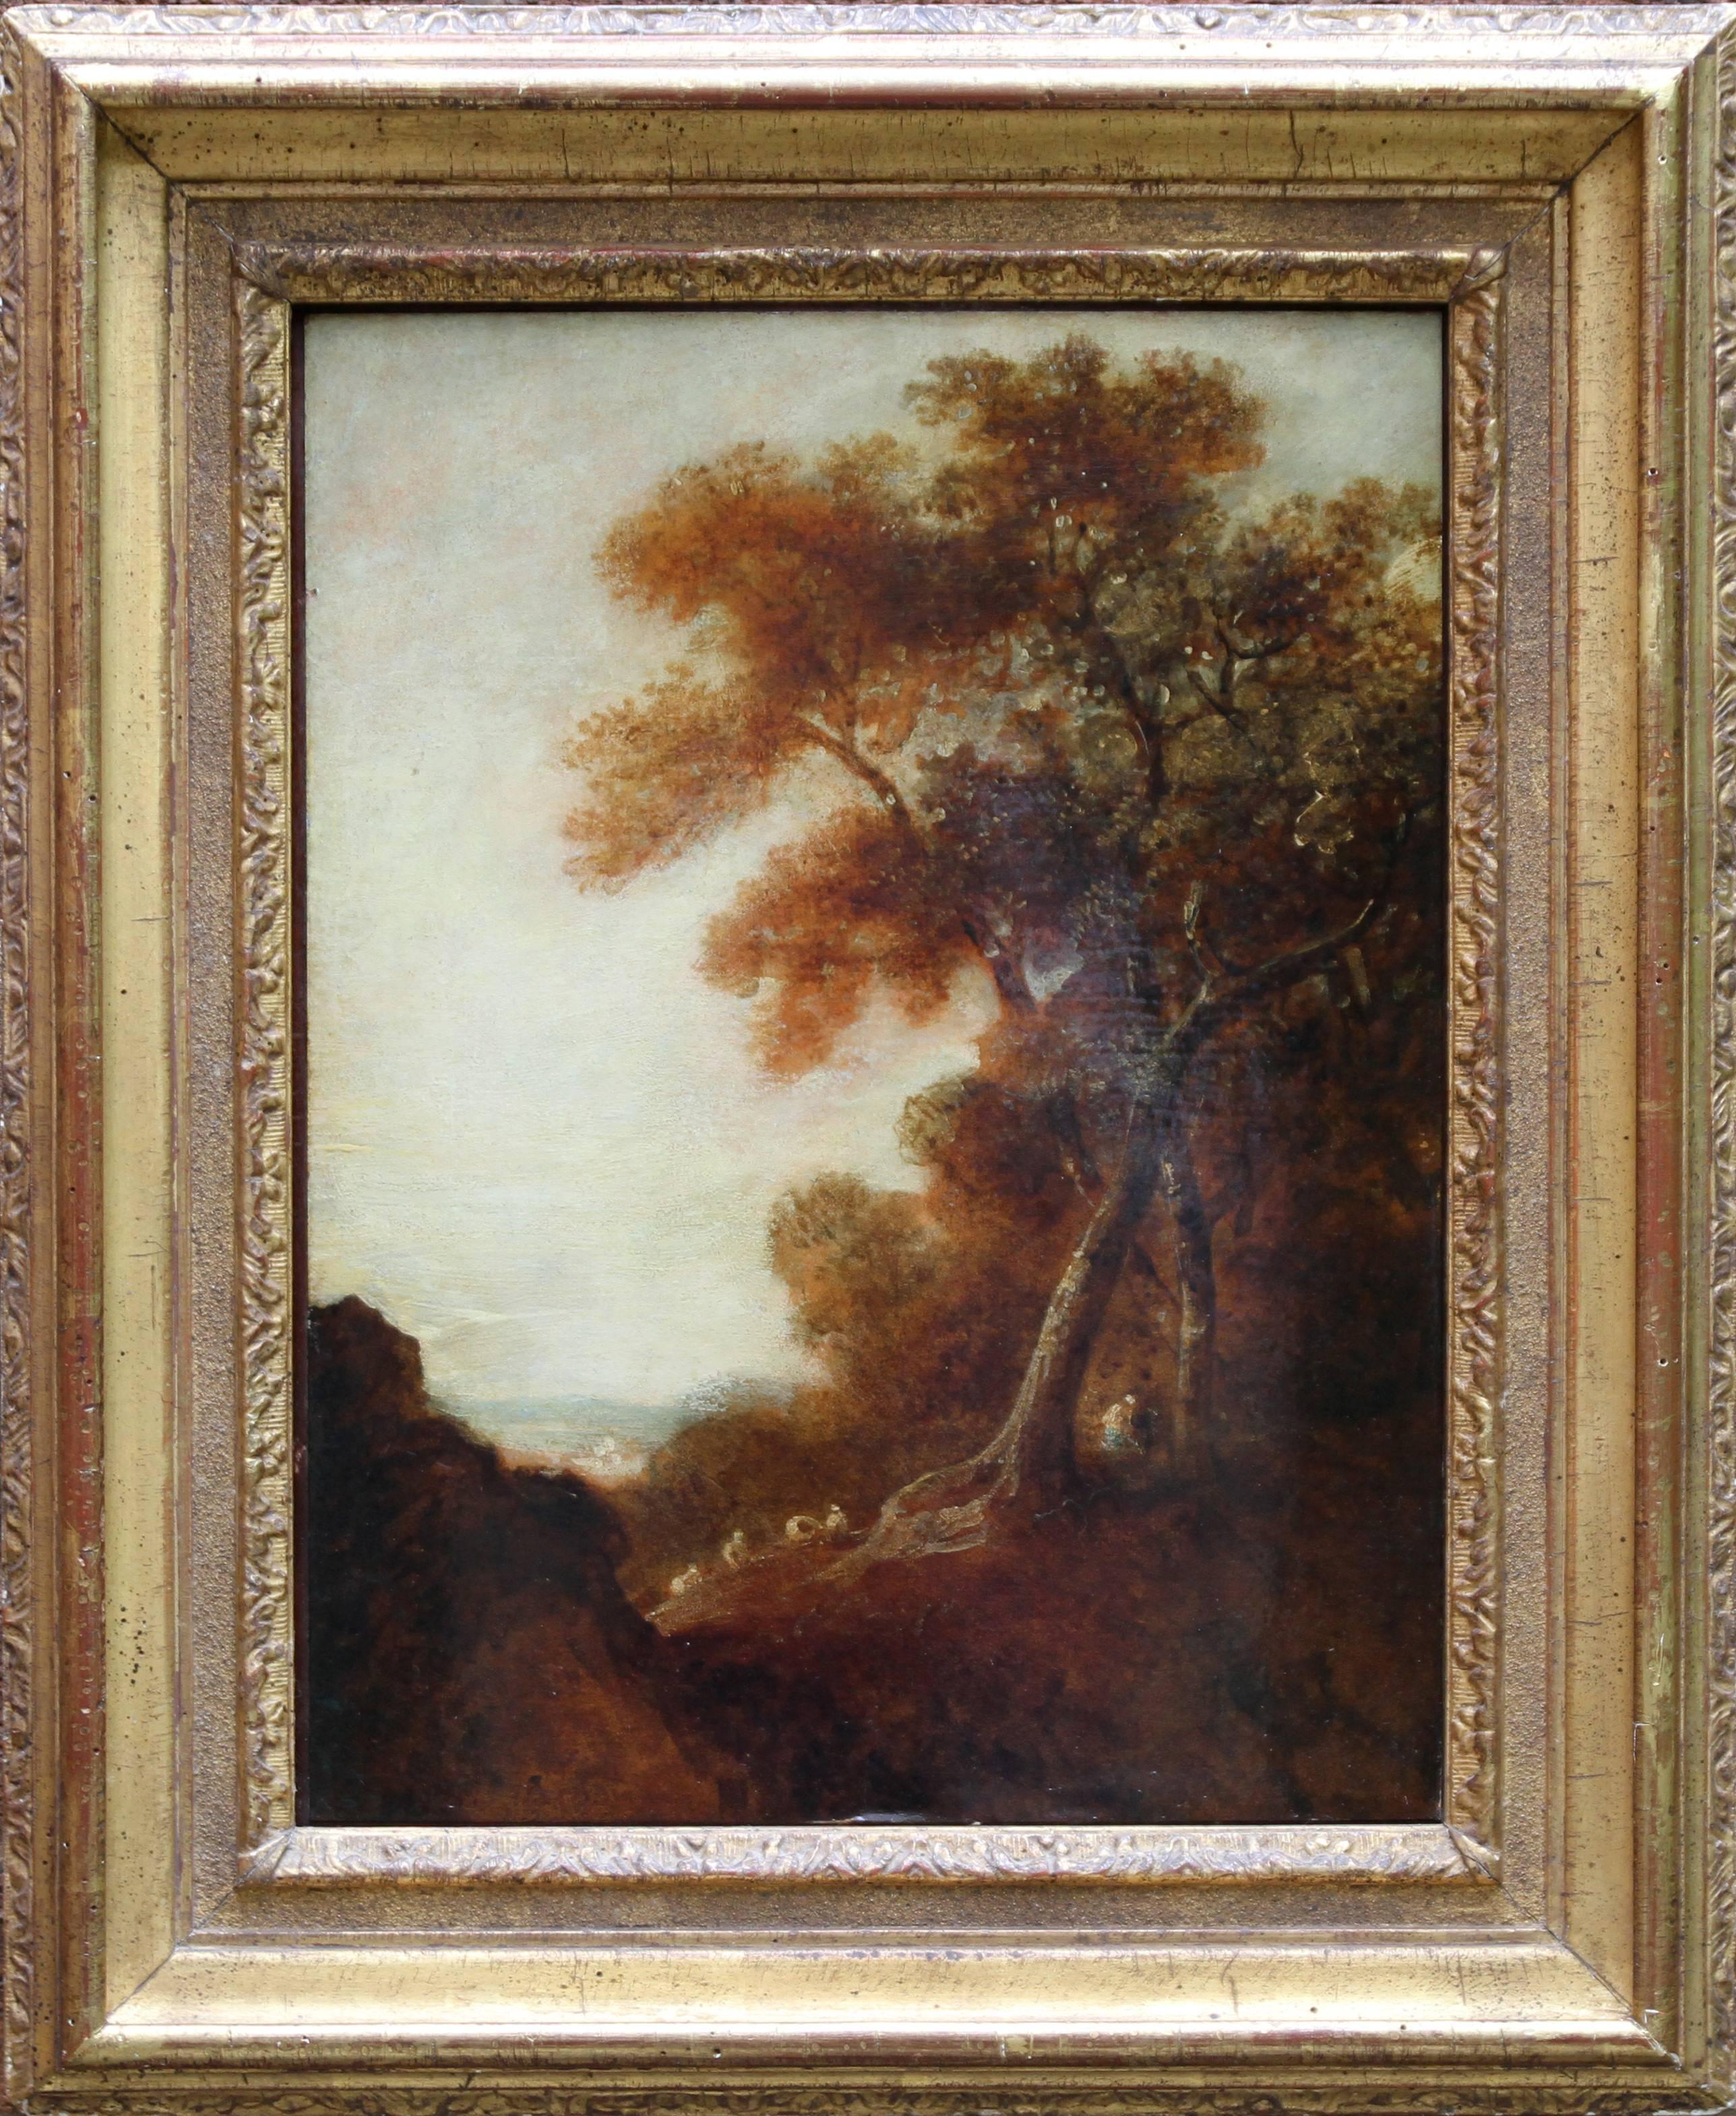 Thomas Gainsborough (circle) Landscape Painting - Wooded Landscape - British art 18thC Old Master oil painting trees figures